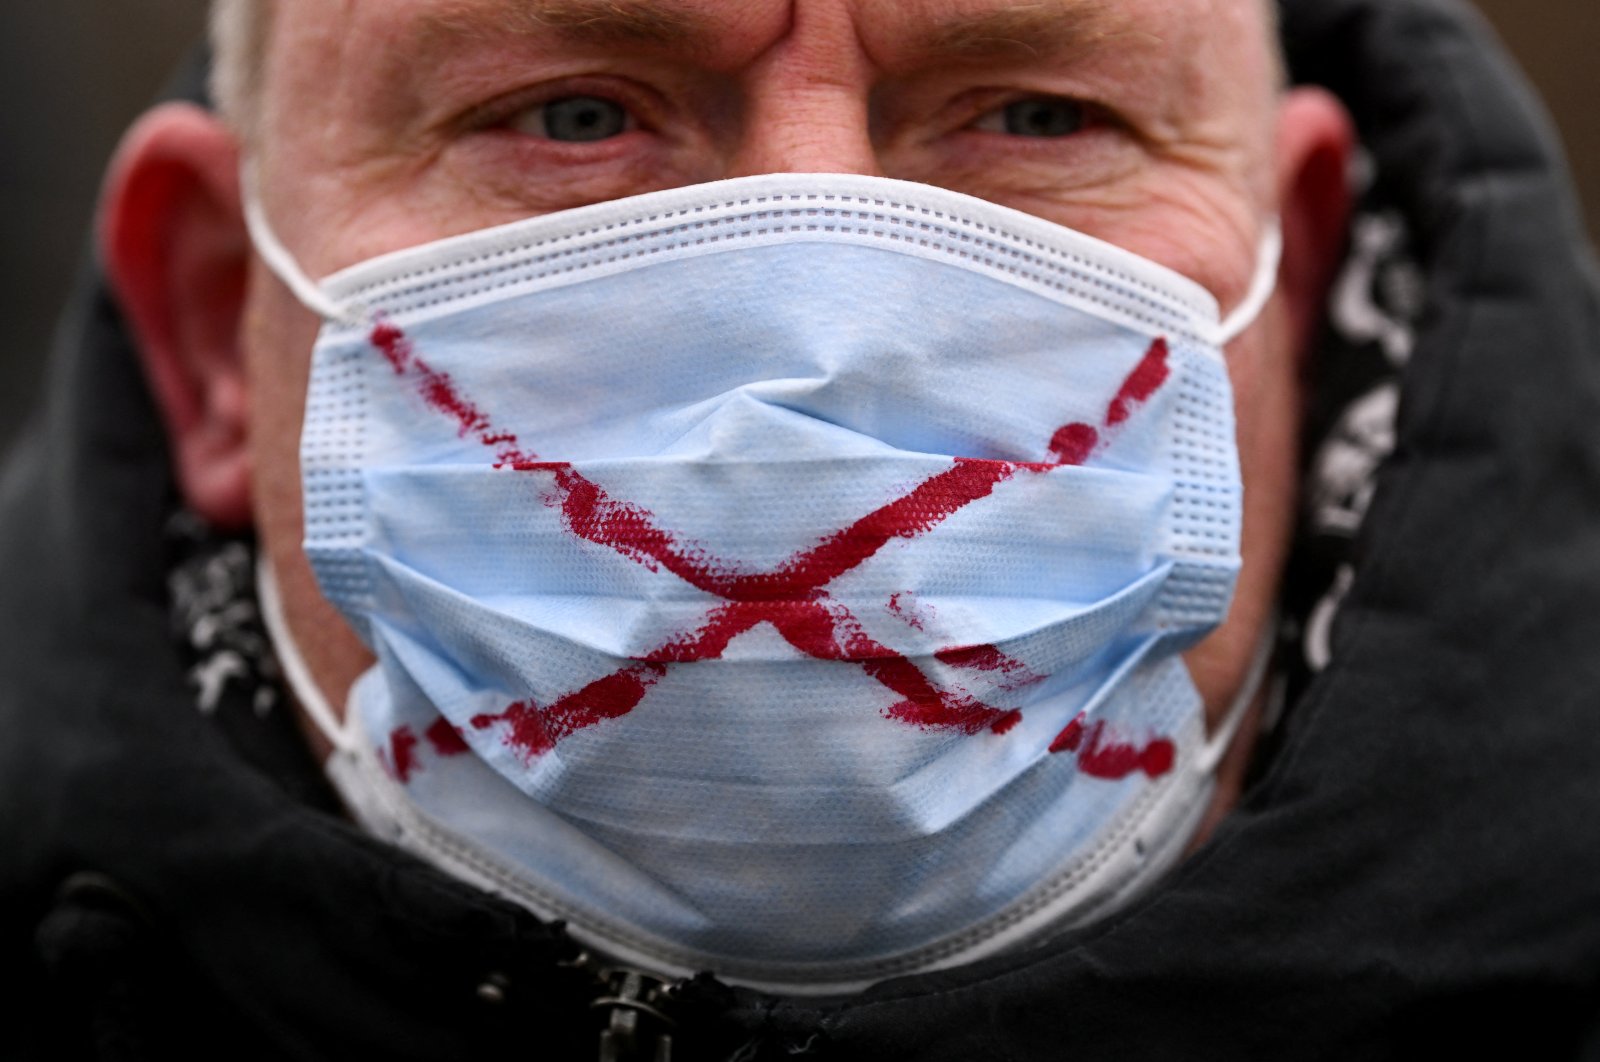 A protester wearing a face mask with a cross takes part in a protest against government measures to curb the spread of the coronavirus disease in Nuremberg, Germany, Jan. 30, 2022. (Reuters Photo)